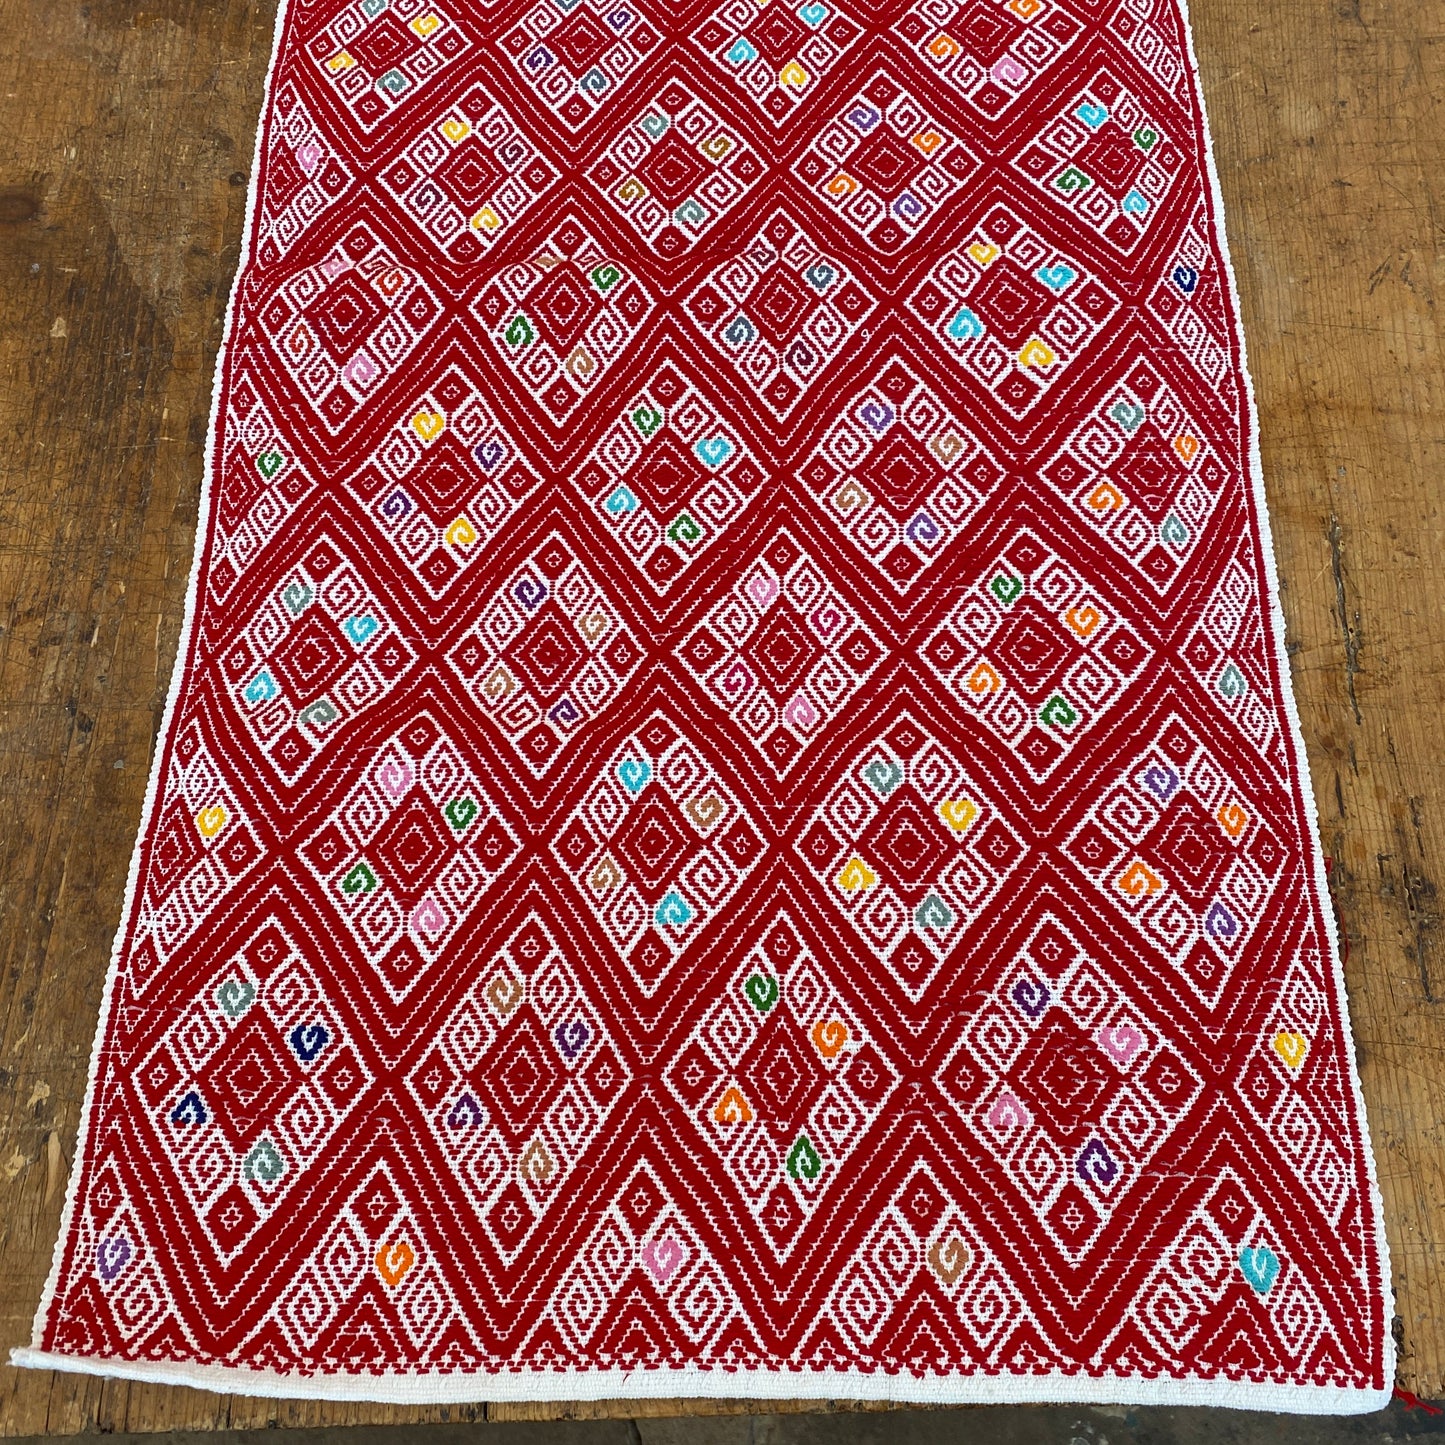 Woven Diamond Table Runners from Mexico - Red and White